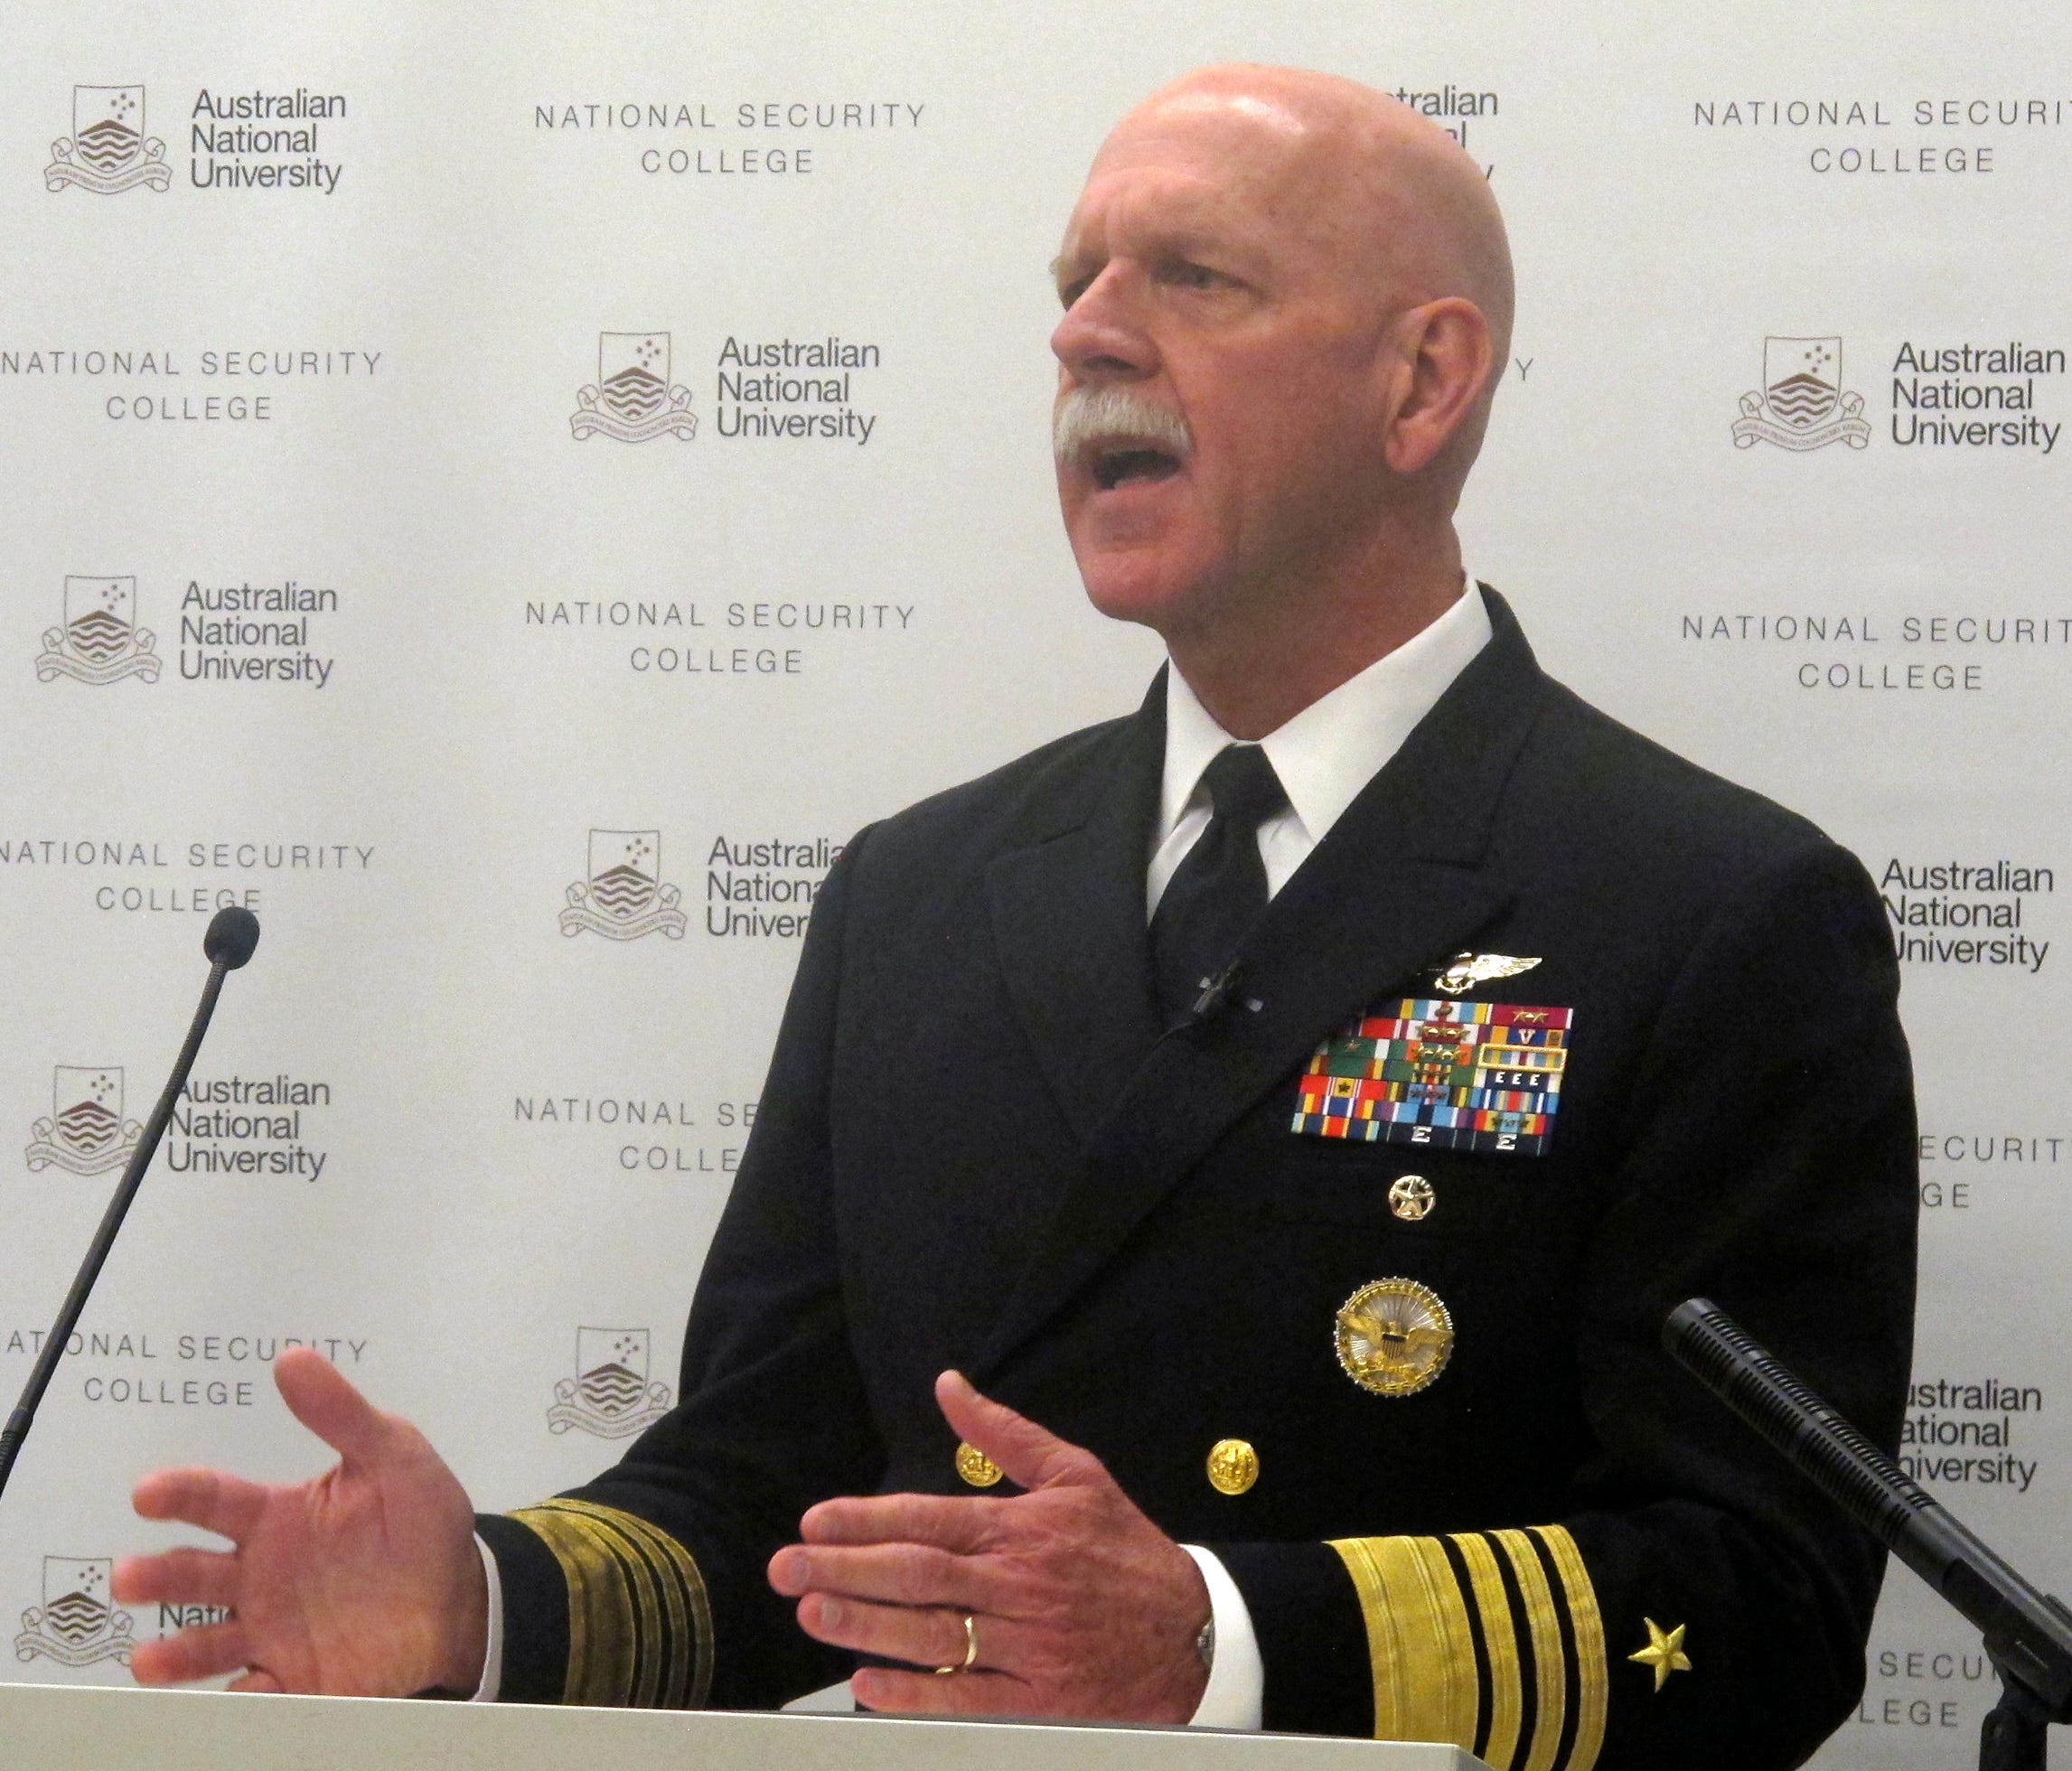 U.S. Pacific Fleet Commander Adm. Scott Swift addresses an Australian National University security conference in Canberra, Australia, Thursday, July 27, 2017. Swifts said he would launch a nuclear strike against China next week if U.S. President Dona